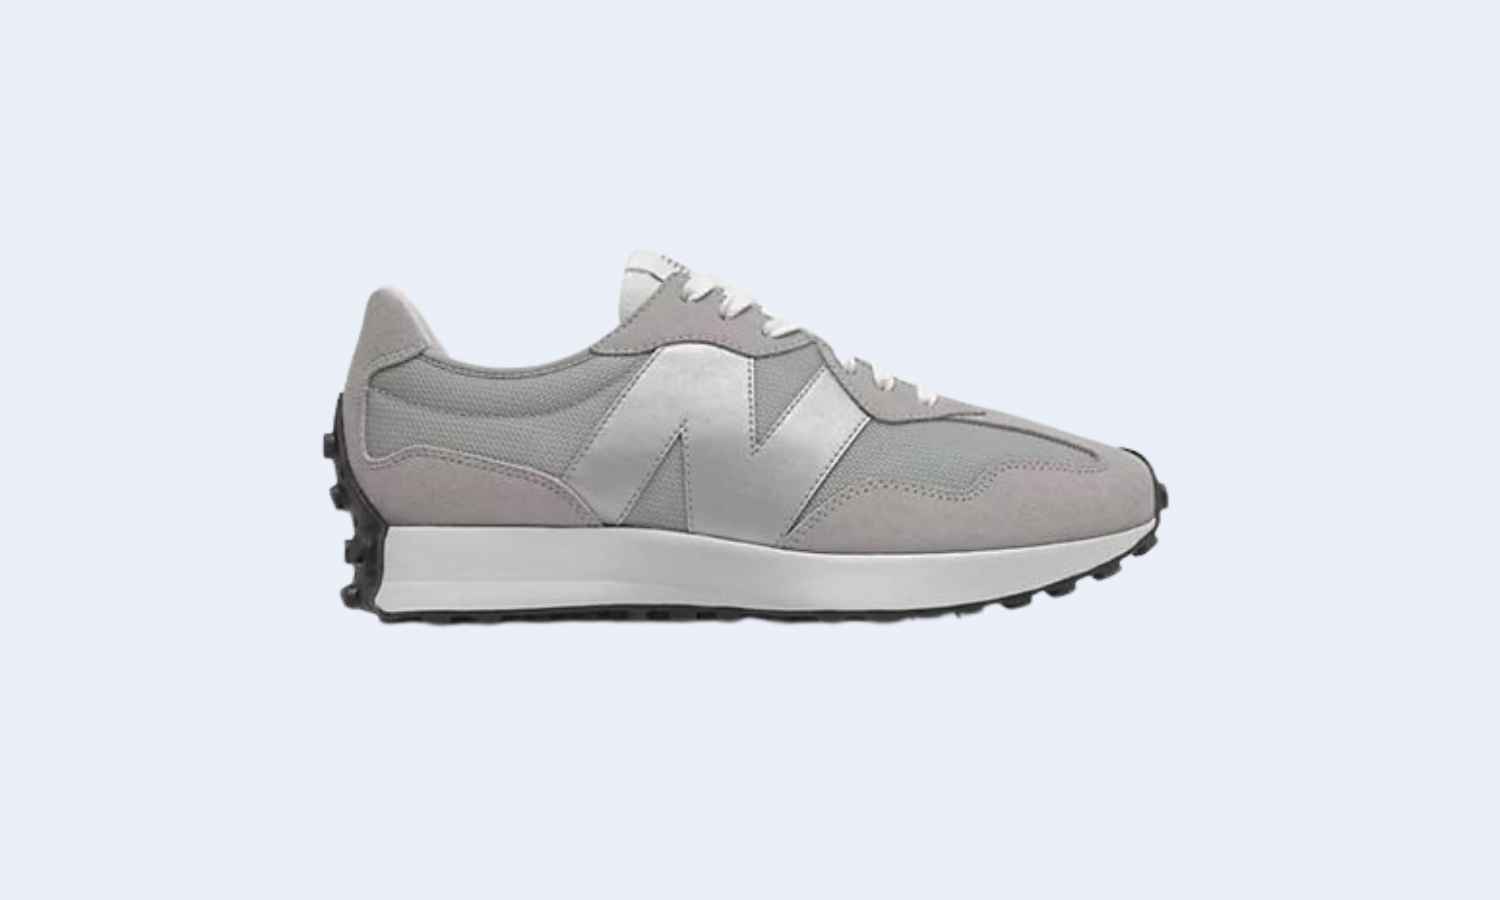 12 Best New Balance Shoes to Change Up Your Look